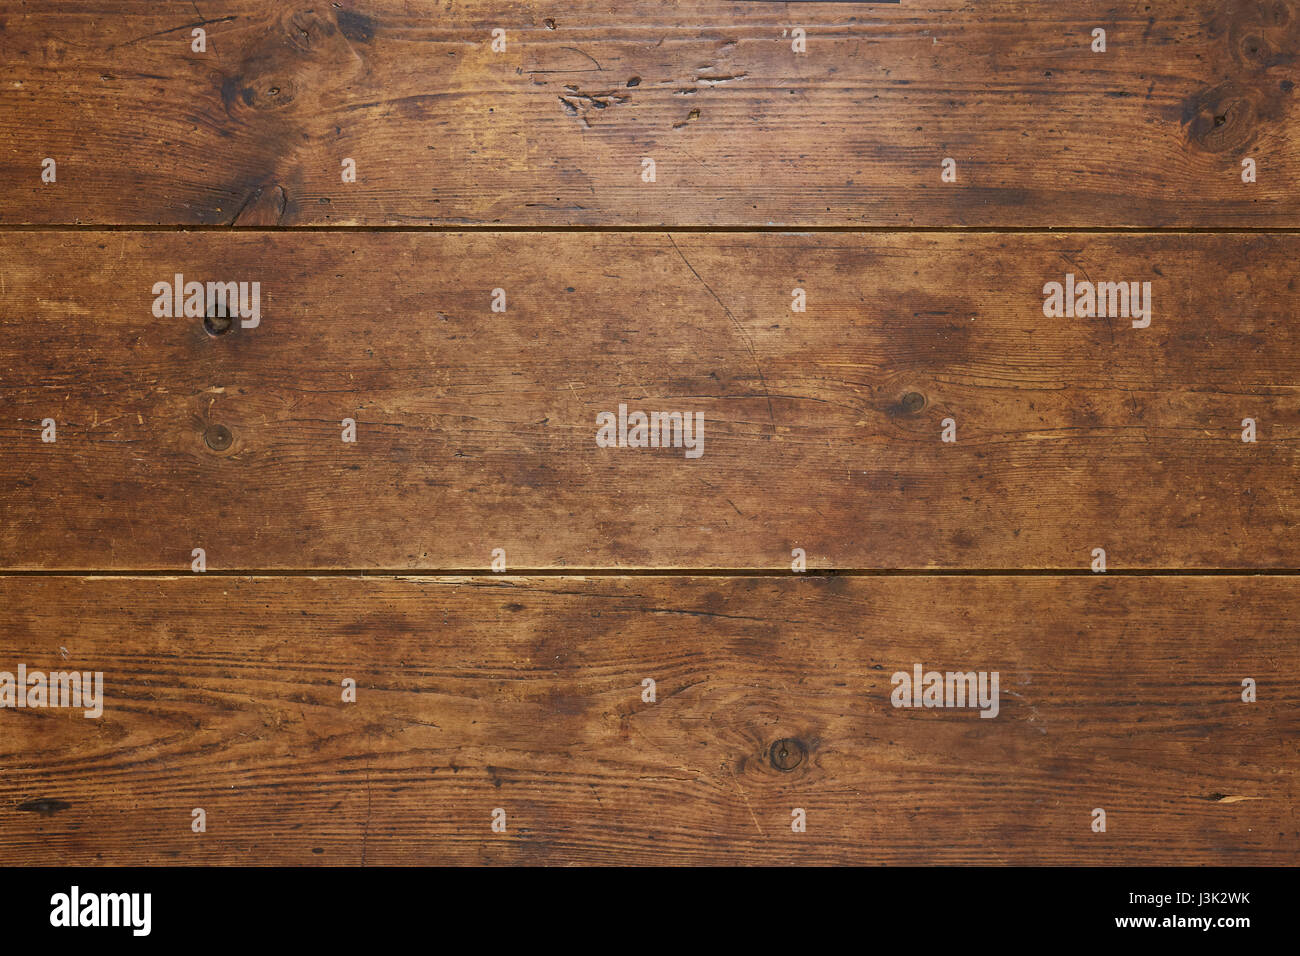 Reclaimed wood surface Stock Photo